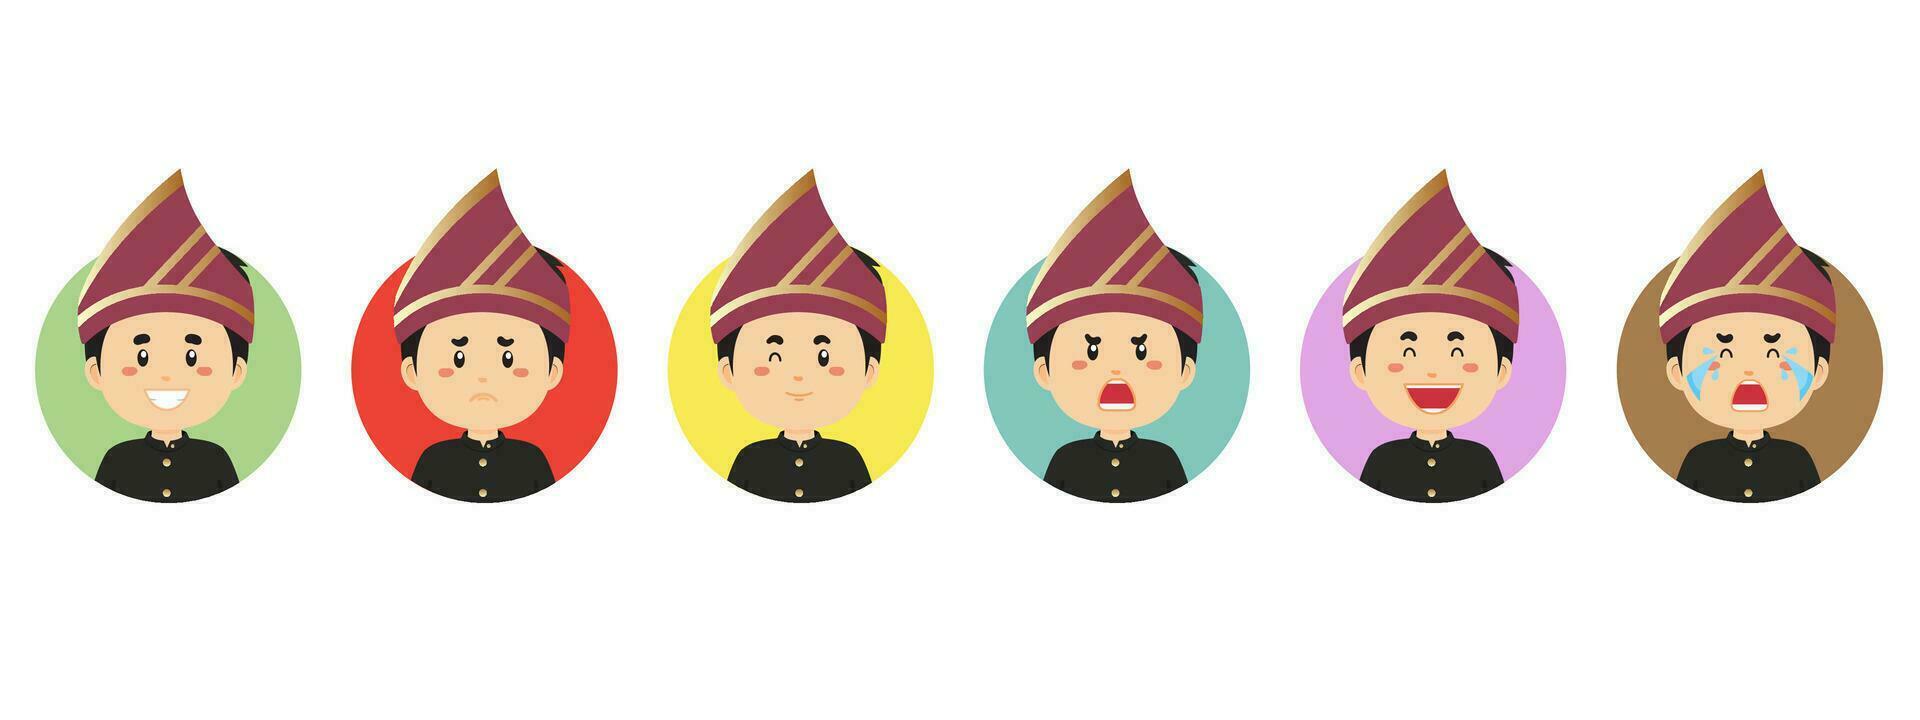 Bengkulu Indonesian Avatar with Various Expression vector